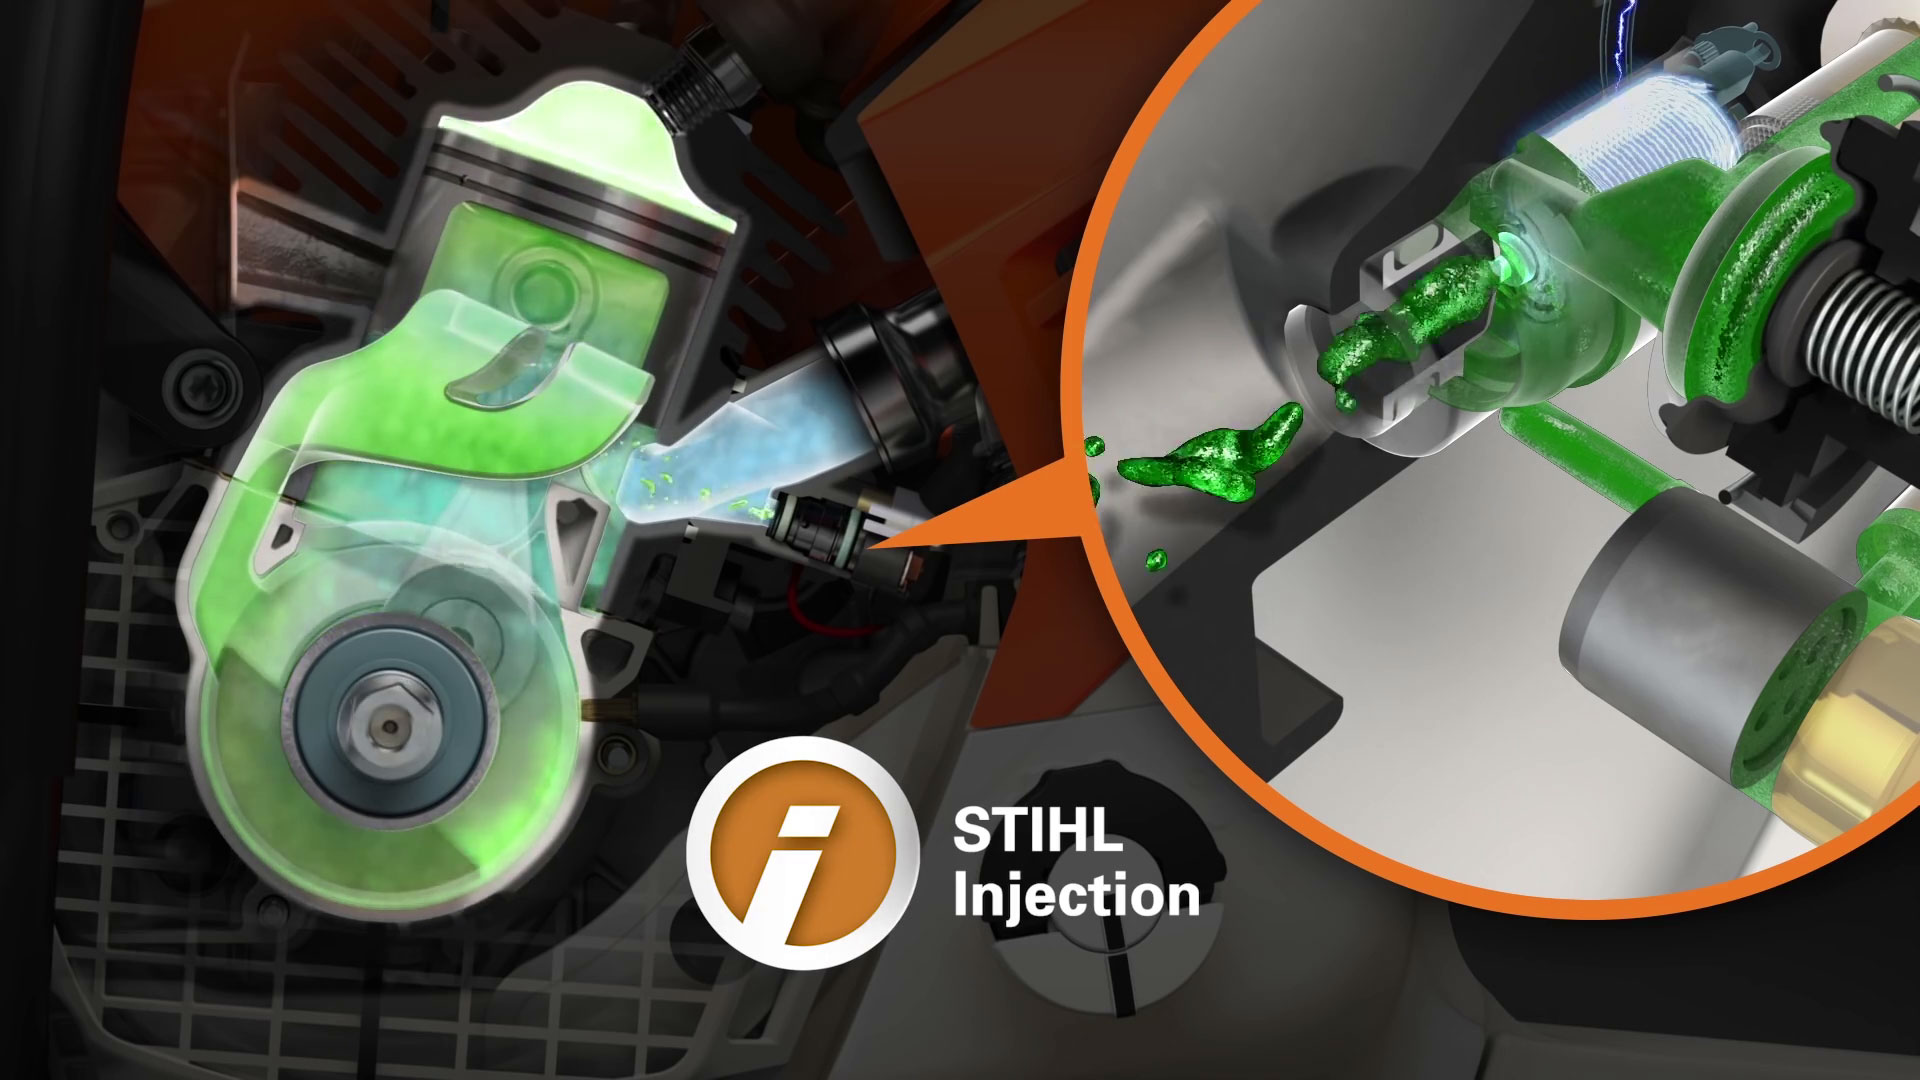 3D Animation - ANDREAS STIHL AG & Co. KG - The STIHL MS 500i is a true innovation: the world’s first chainsaw with electronically controlled fuel injection.